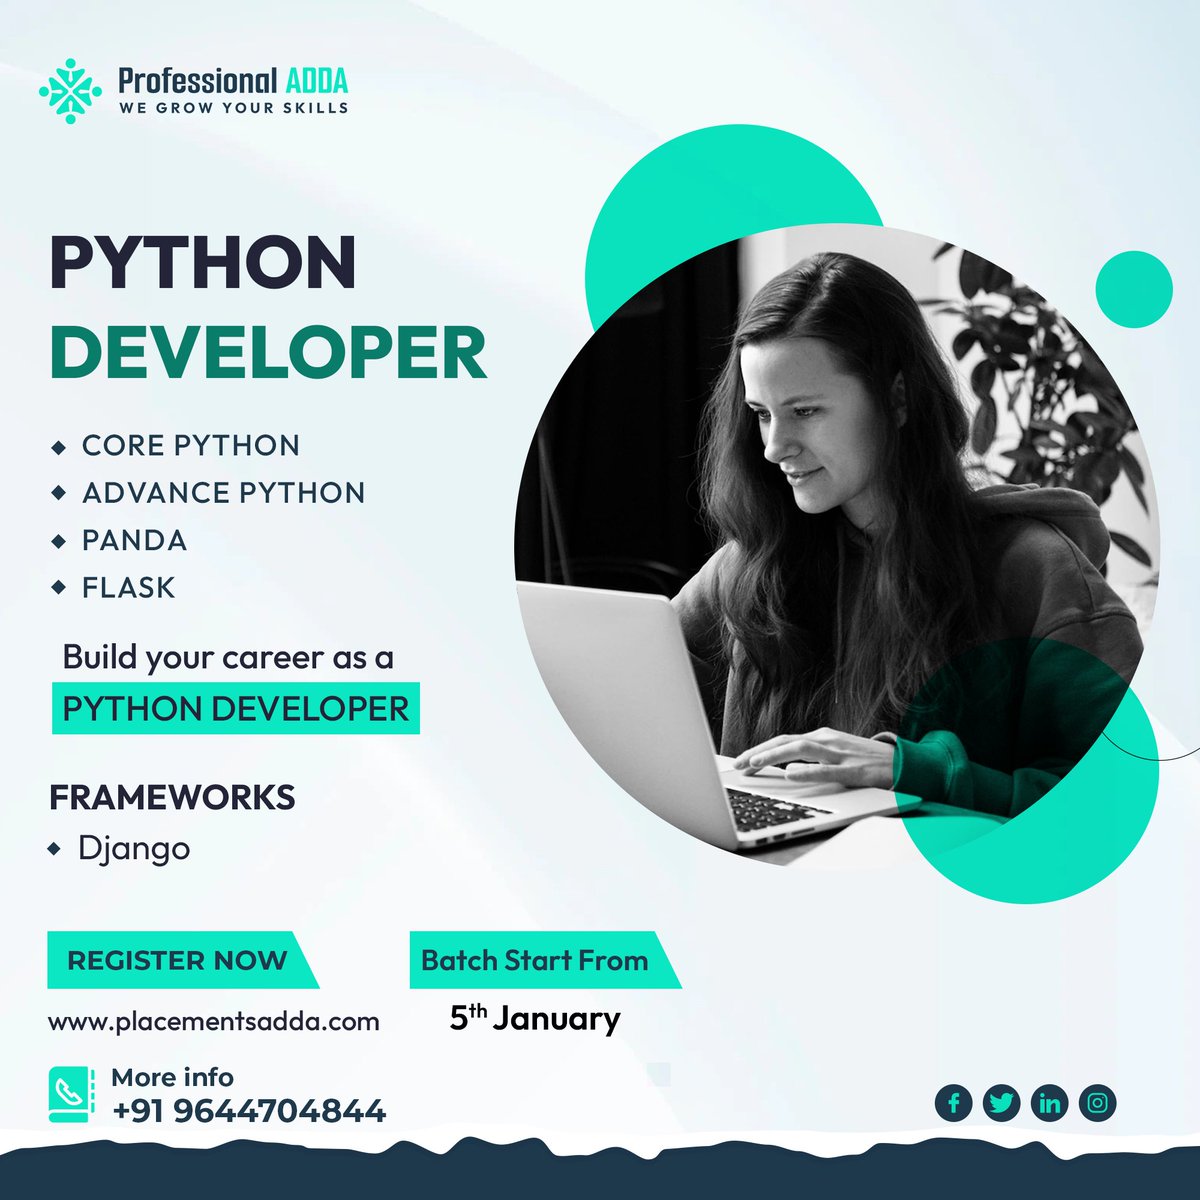 *Python Developer* 

'Build Your Career as a Python Developer'
Batch Start From:
-->> 5th January <<--

-> Call 📞- +91-9644704844 📱

#ProfessionalAdda #ITprofessional #PythonDeveloper #CorePython #AdvancePython #technology #corporatetraining #placementstraining #joinus #Indore